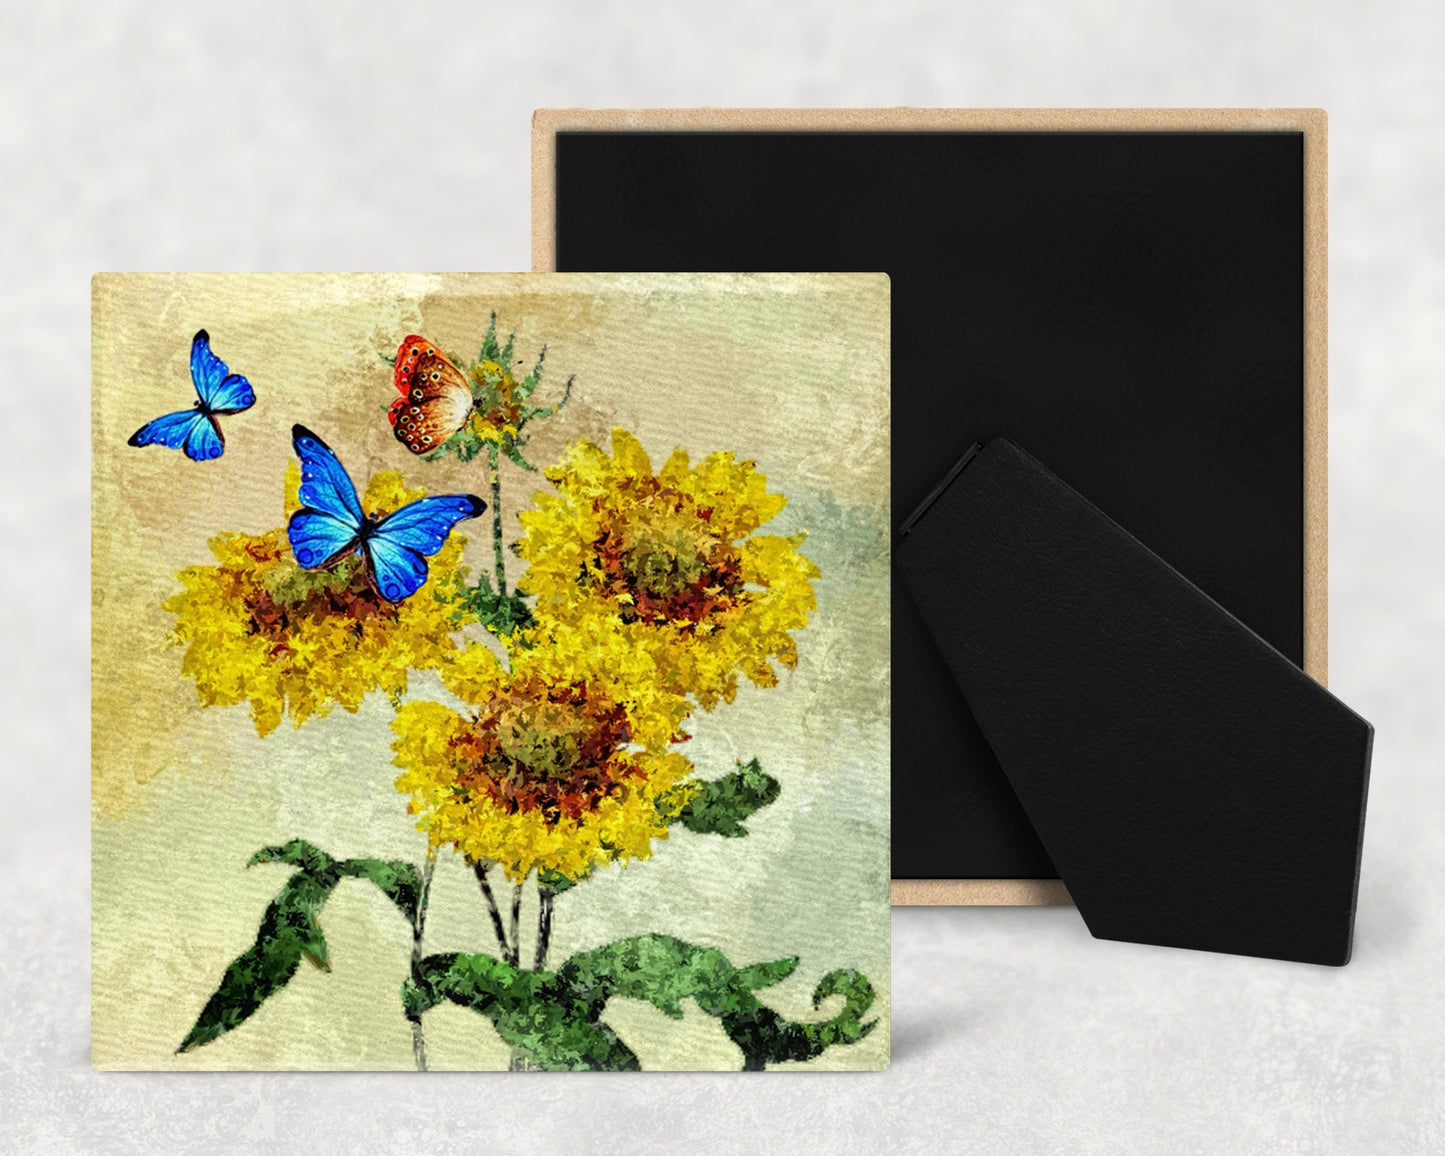 Butterflies and Sunflowers Decorative Ceramic Tile with Optional Easel Back - Available in 3 Sizes